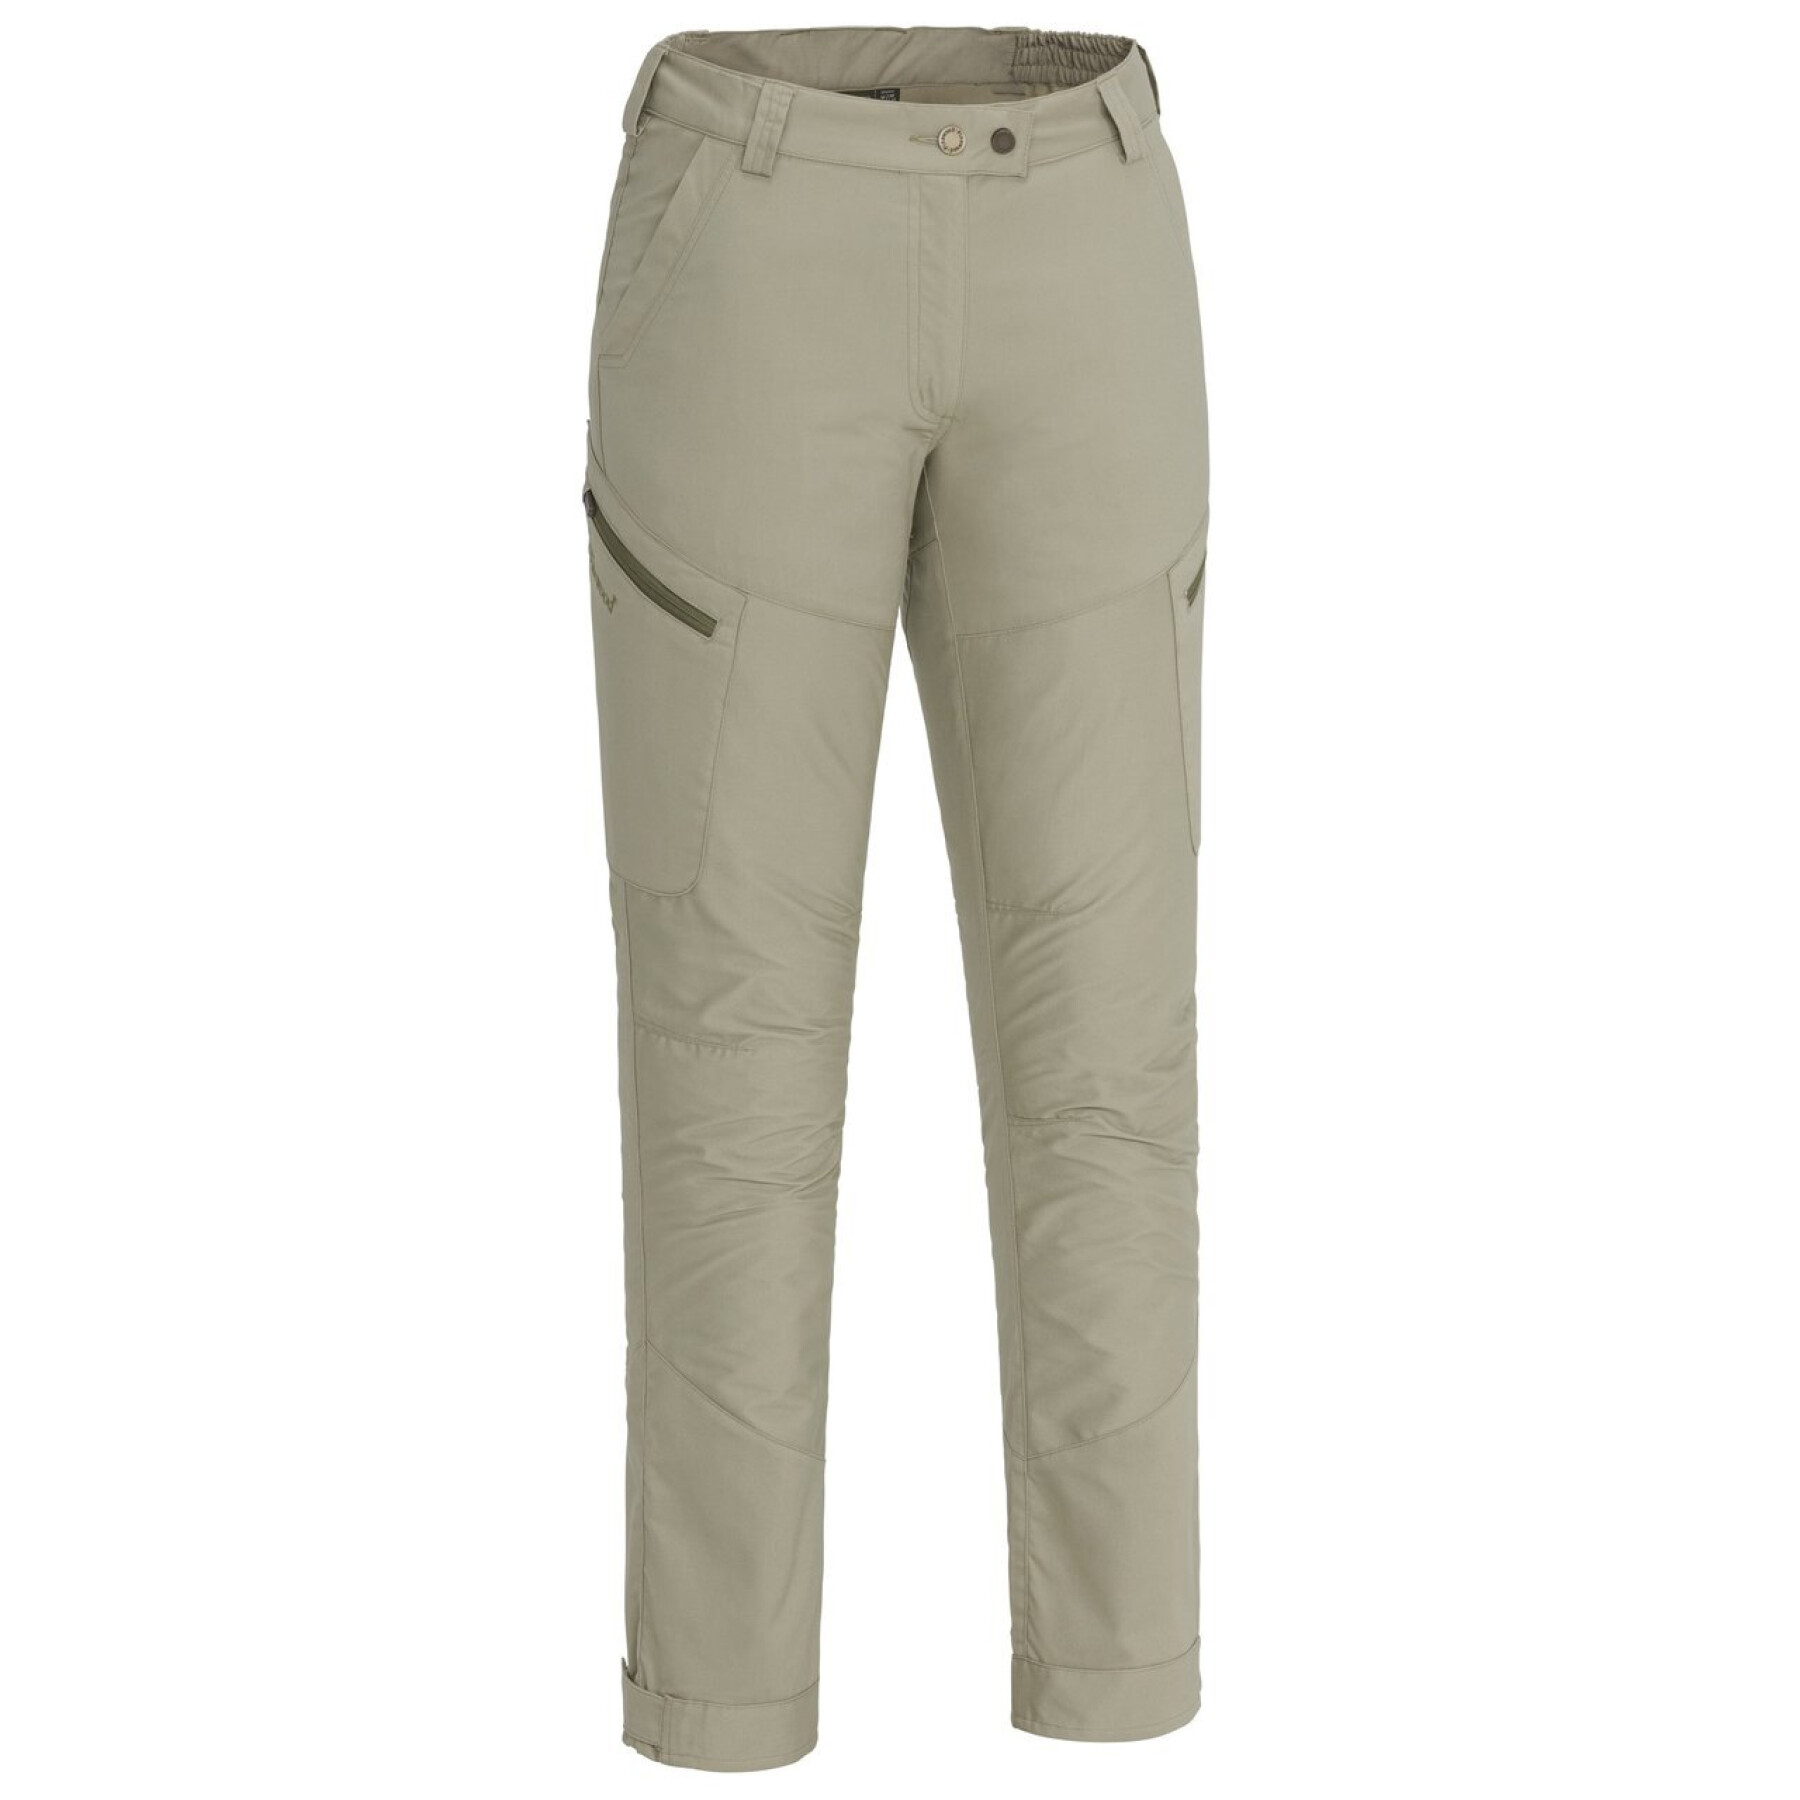 Women's pants Pinewood Tiveden InsectSafe